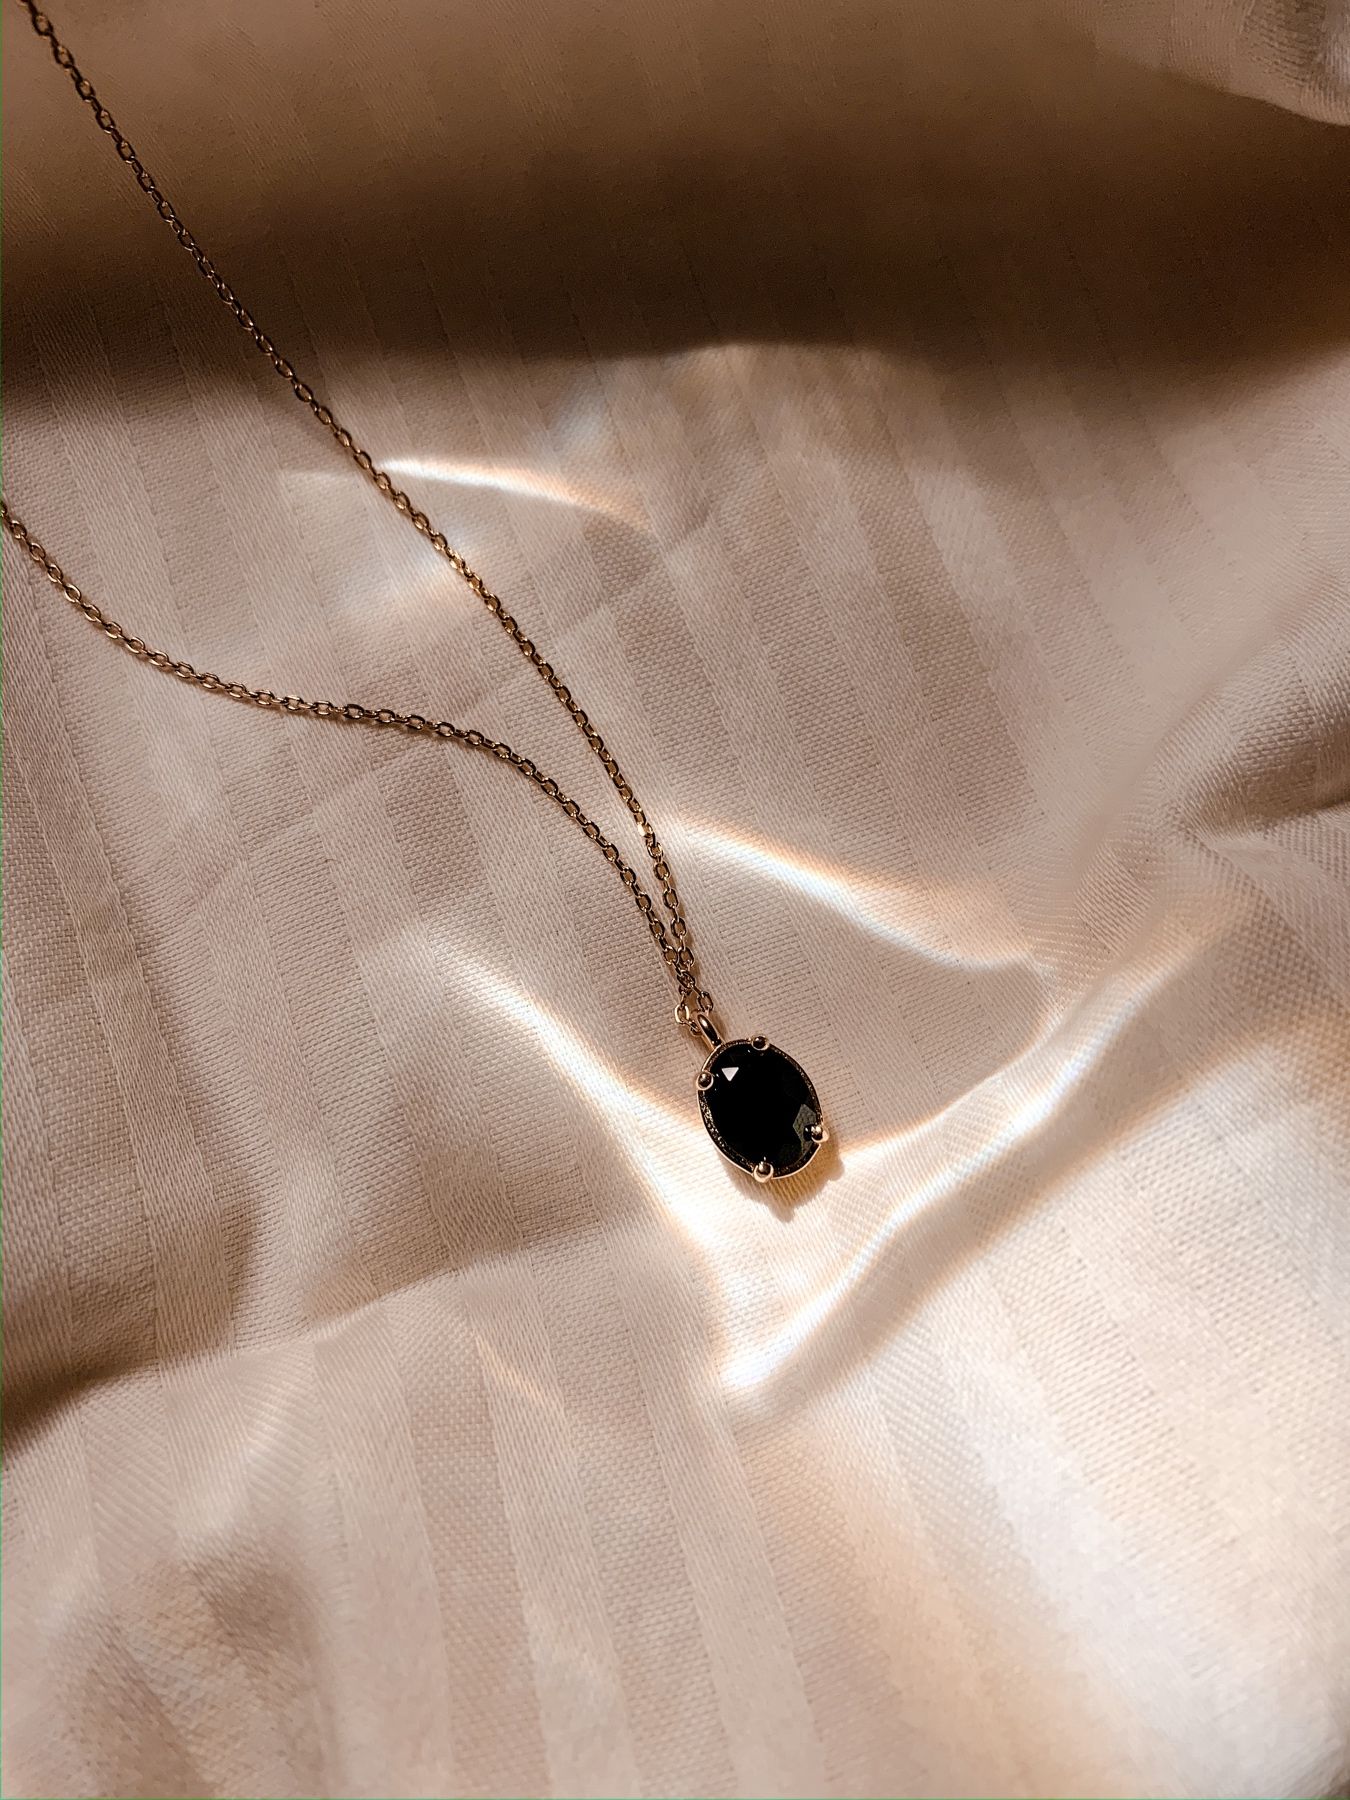 Find out the wide variety in onyx jewelry